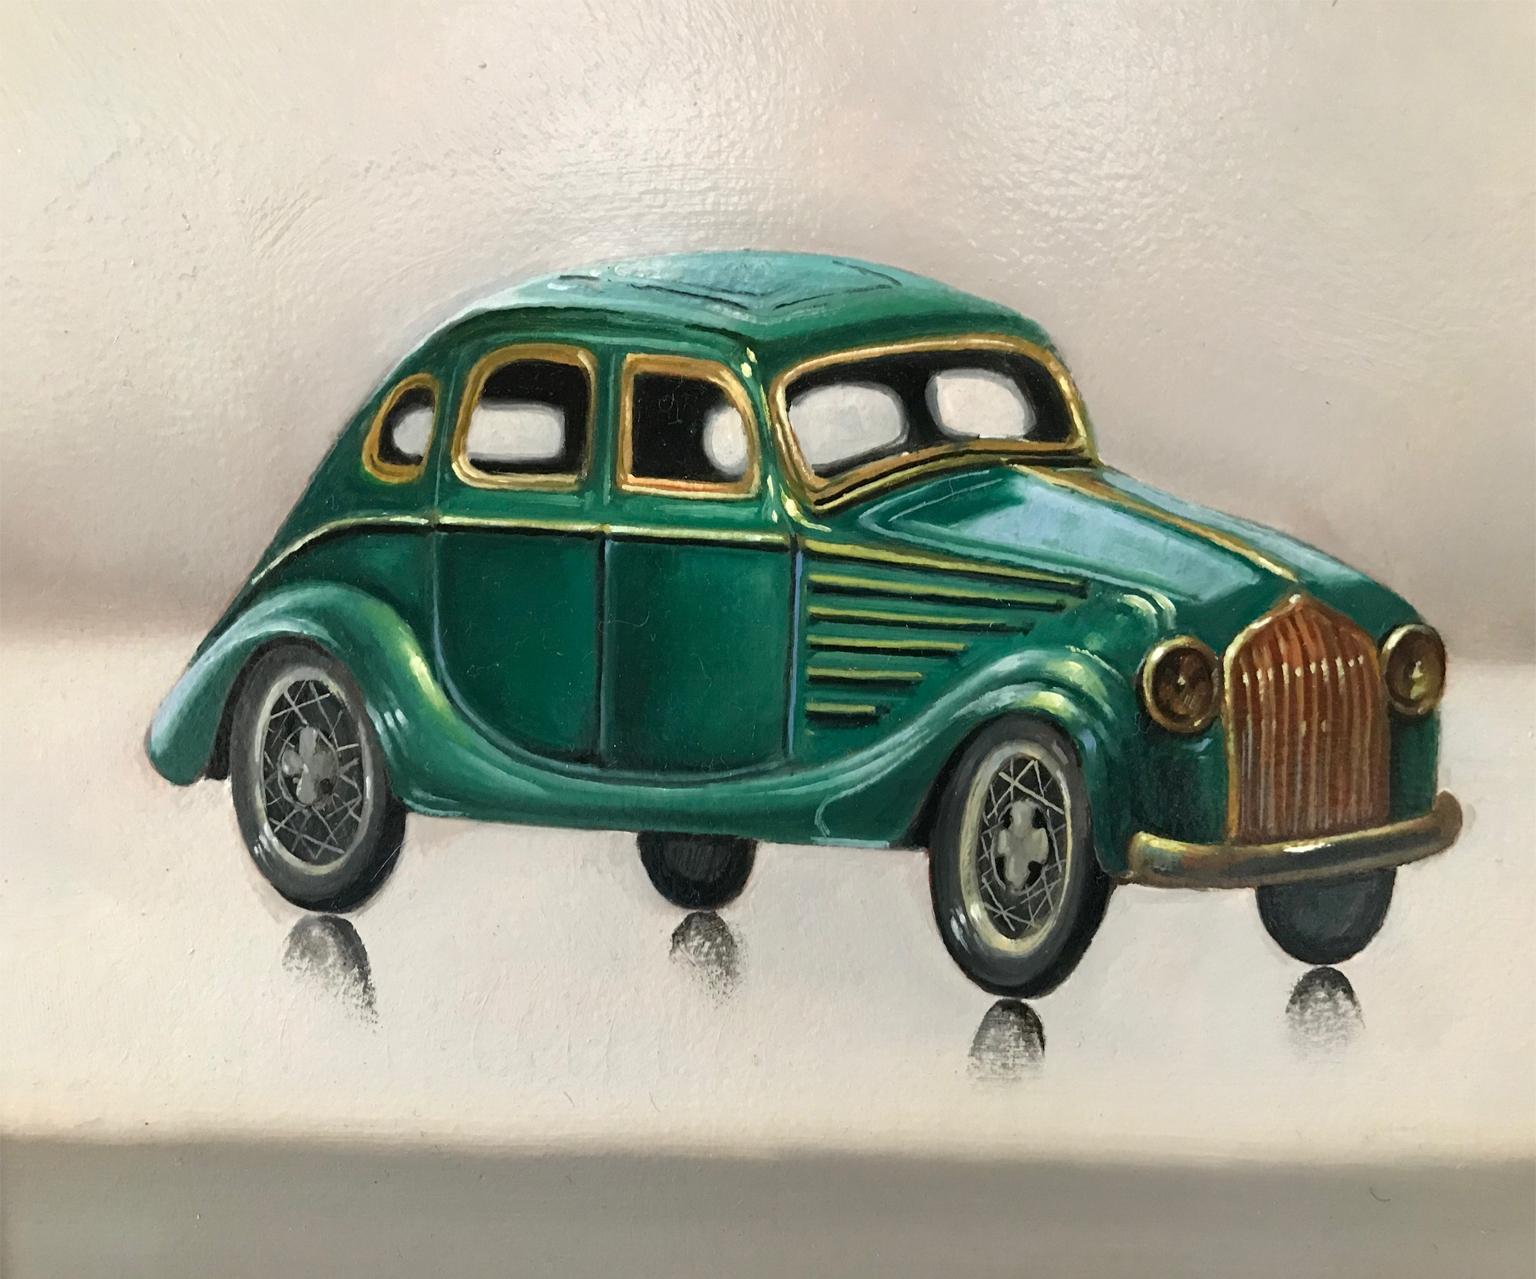 STILL LIFE, CARS AND MARBLES - Painting by Raquel Carbonell